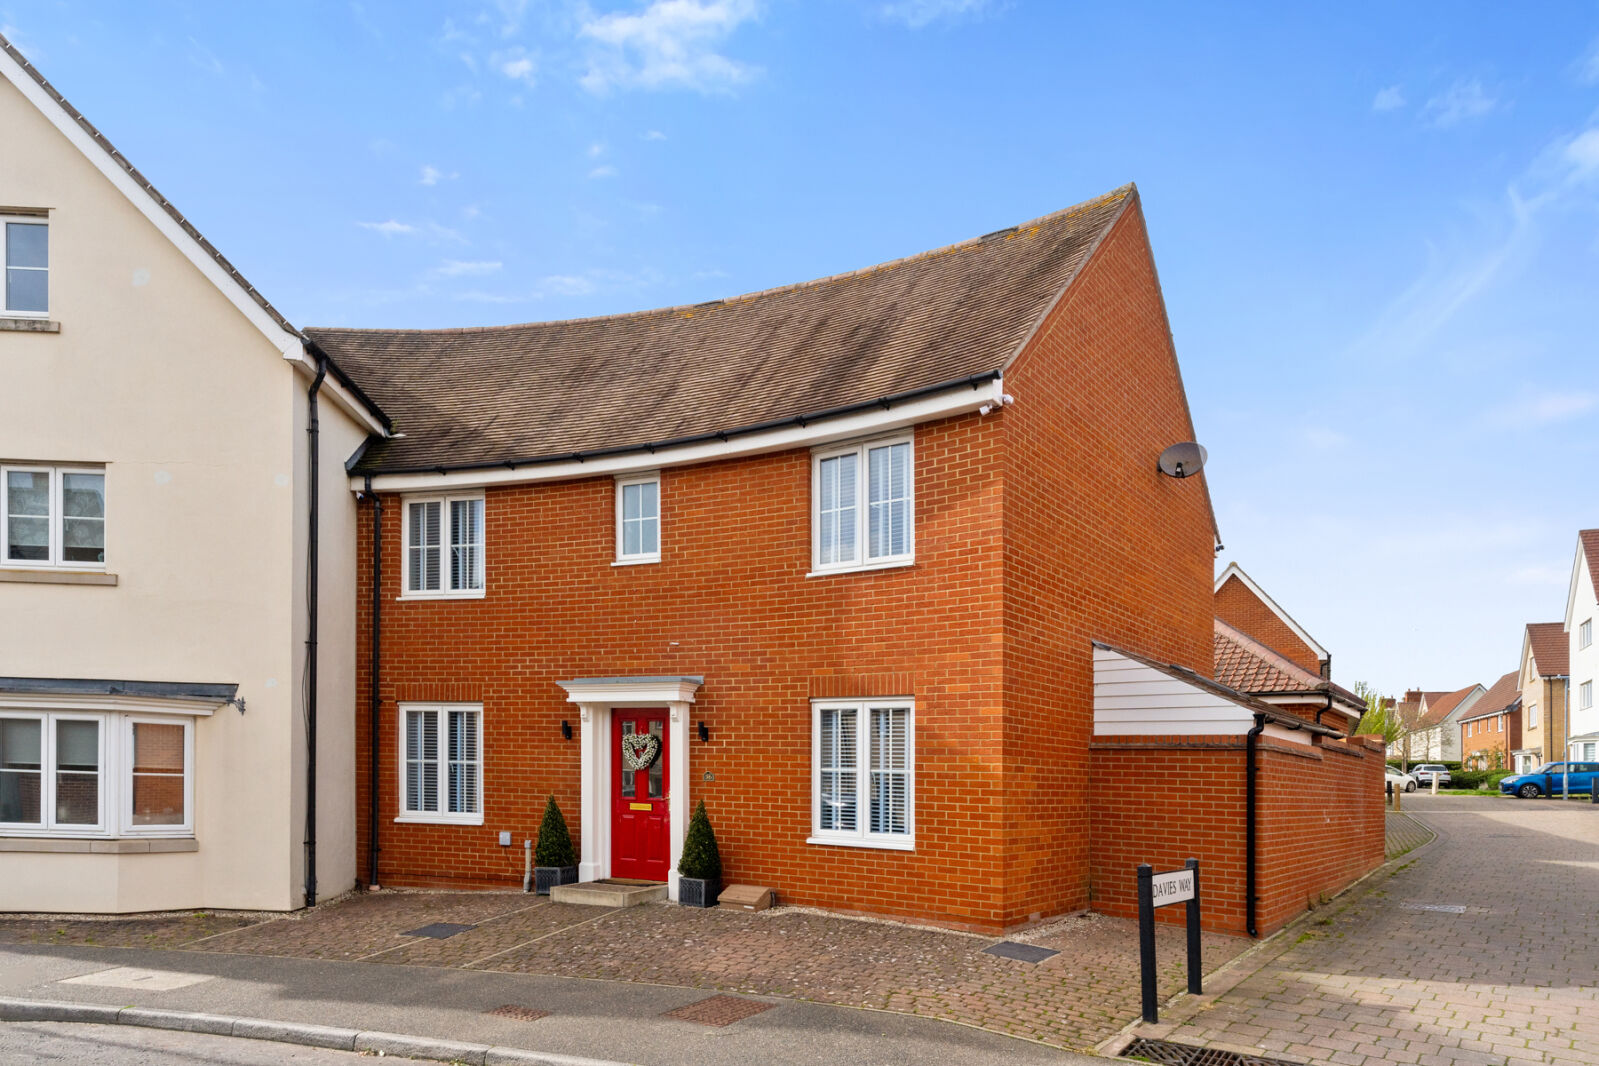 3 bedroom semi detached house for sale Ranulf Road, Flitch Green, CM6, main image